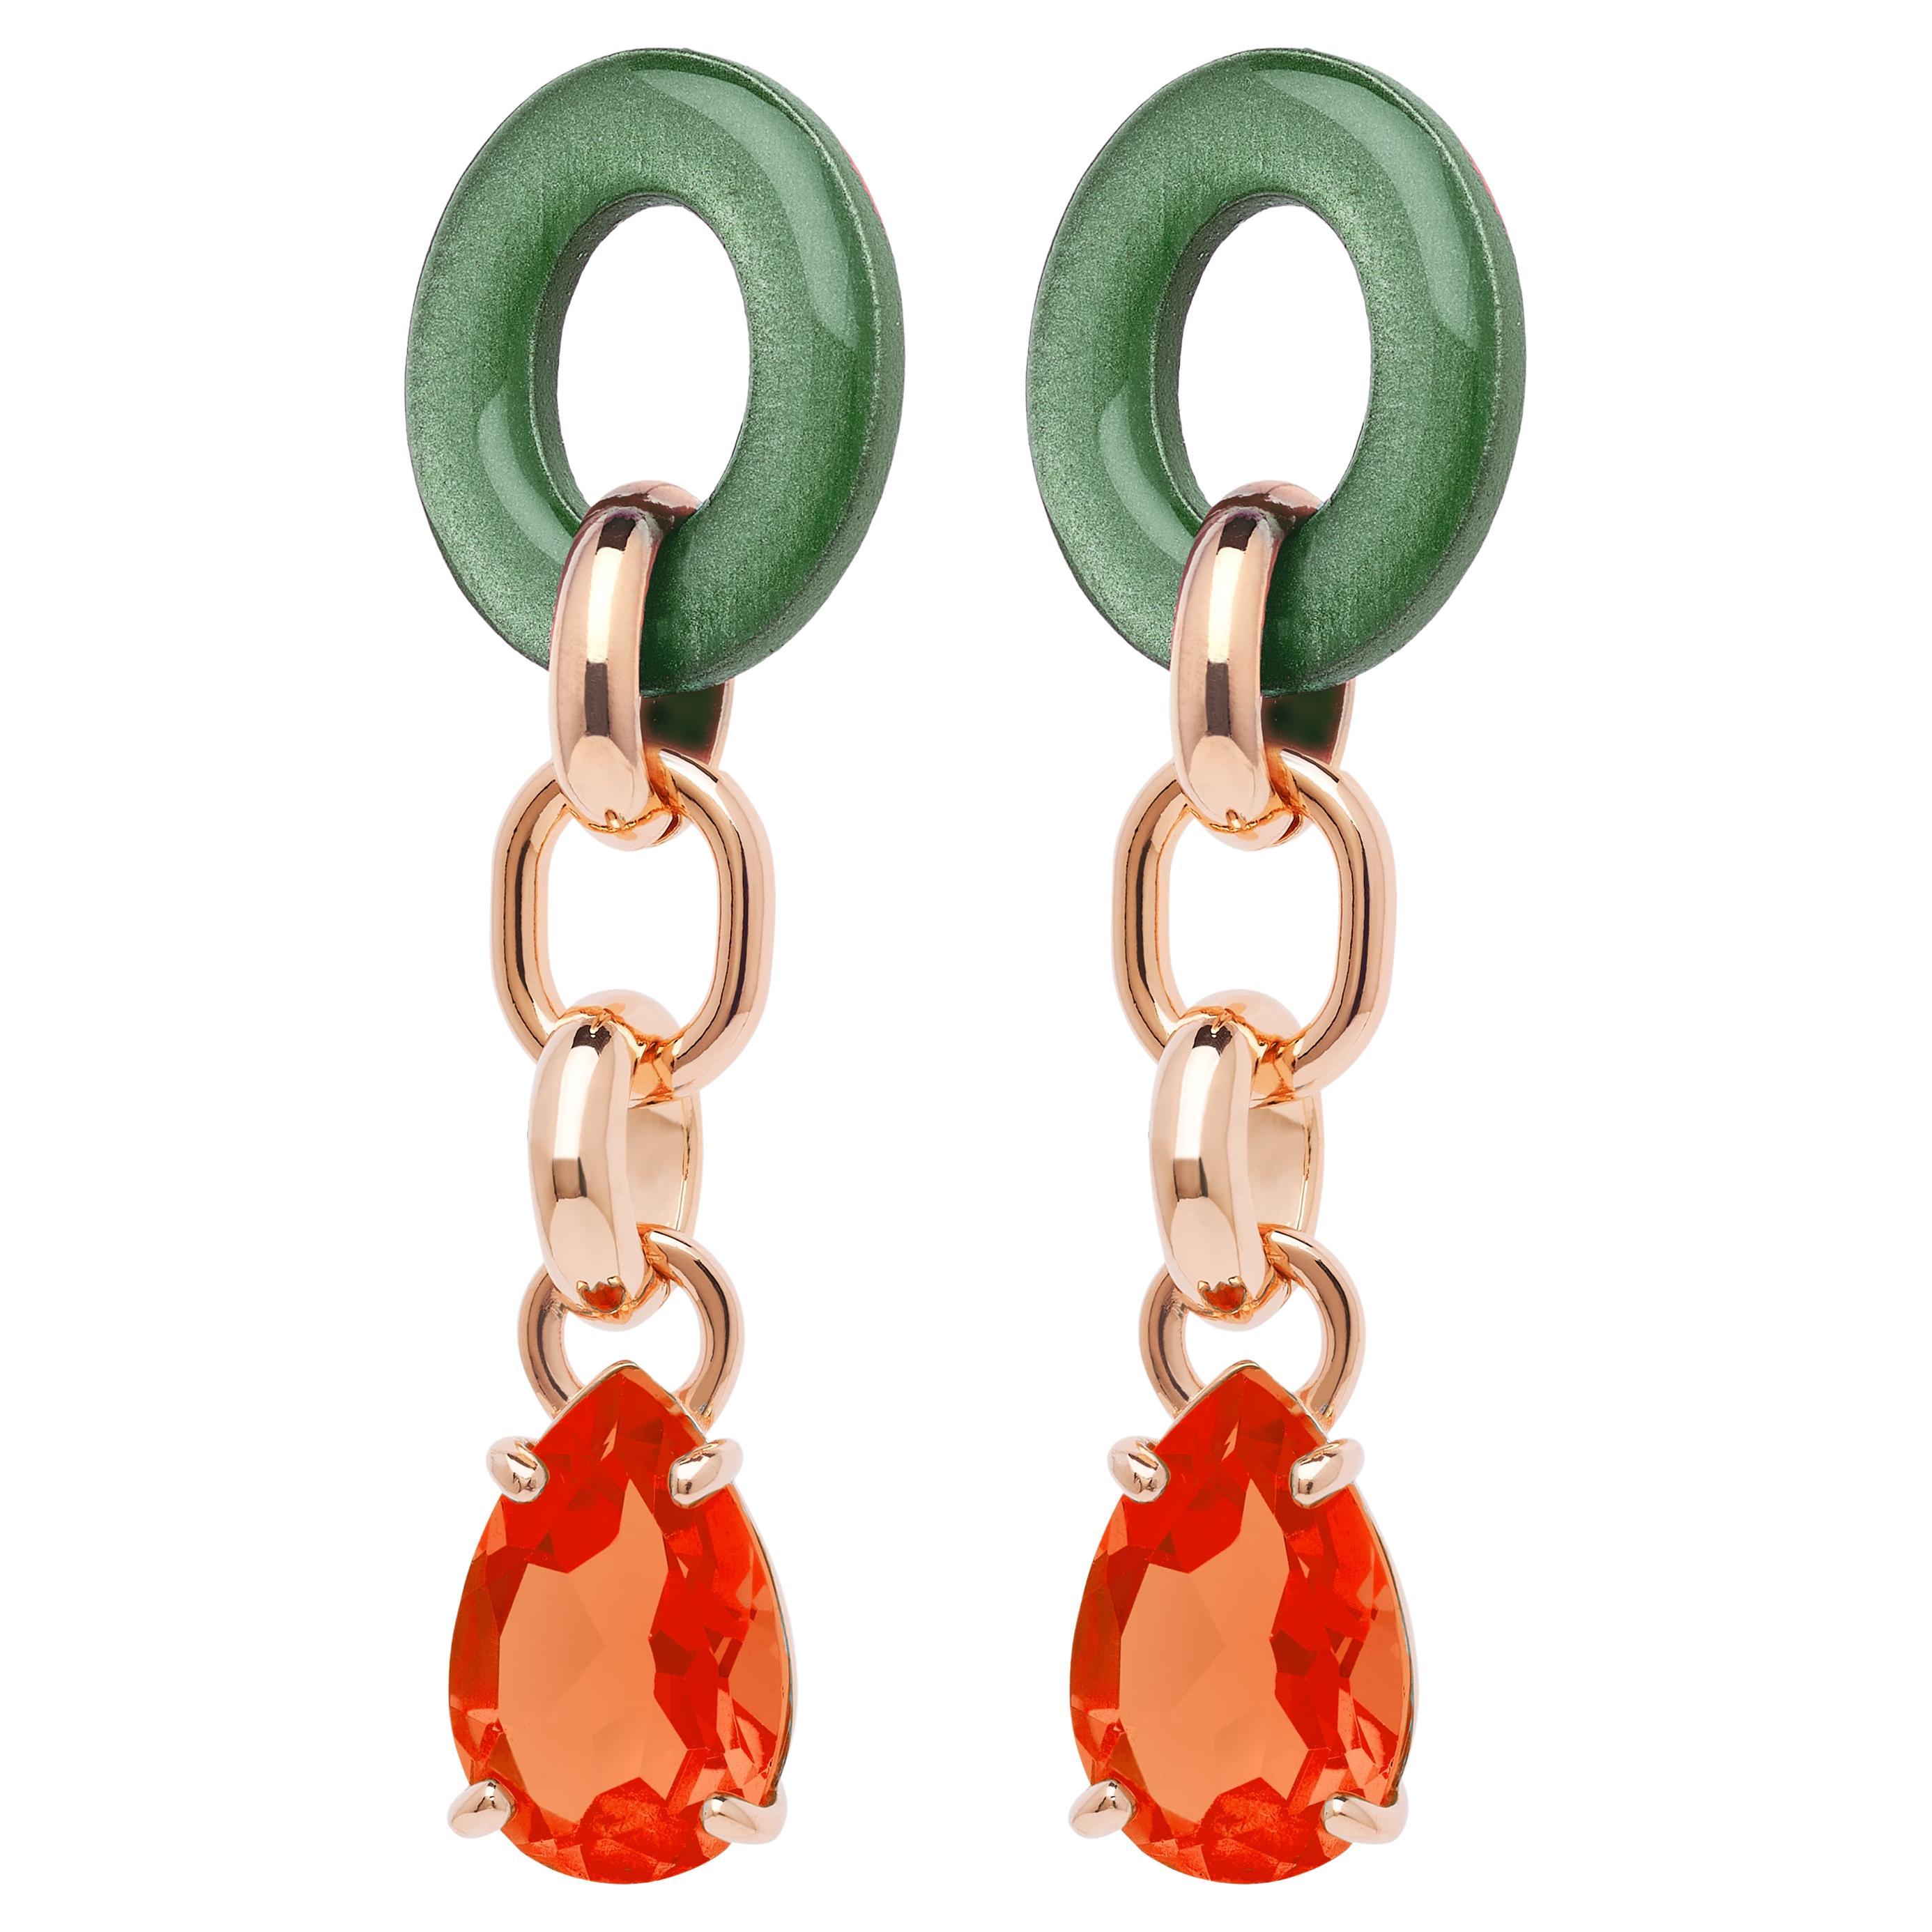 Rossoprezioso Drop Chain Earrings in Lacquered and Enameled Wood + Quartz Gem For Sale